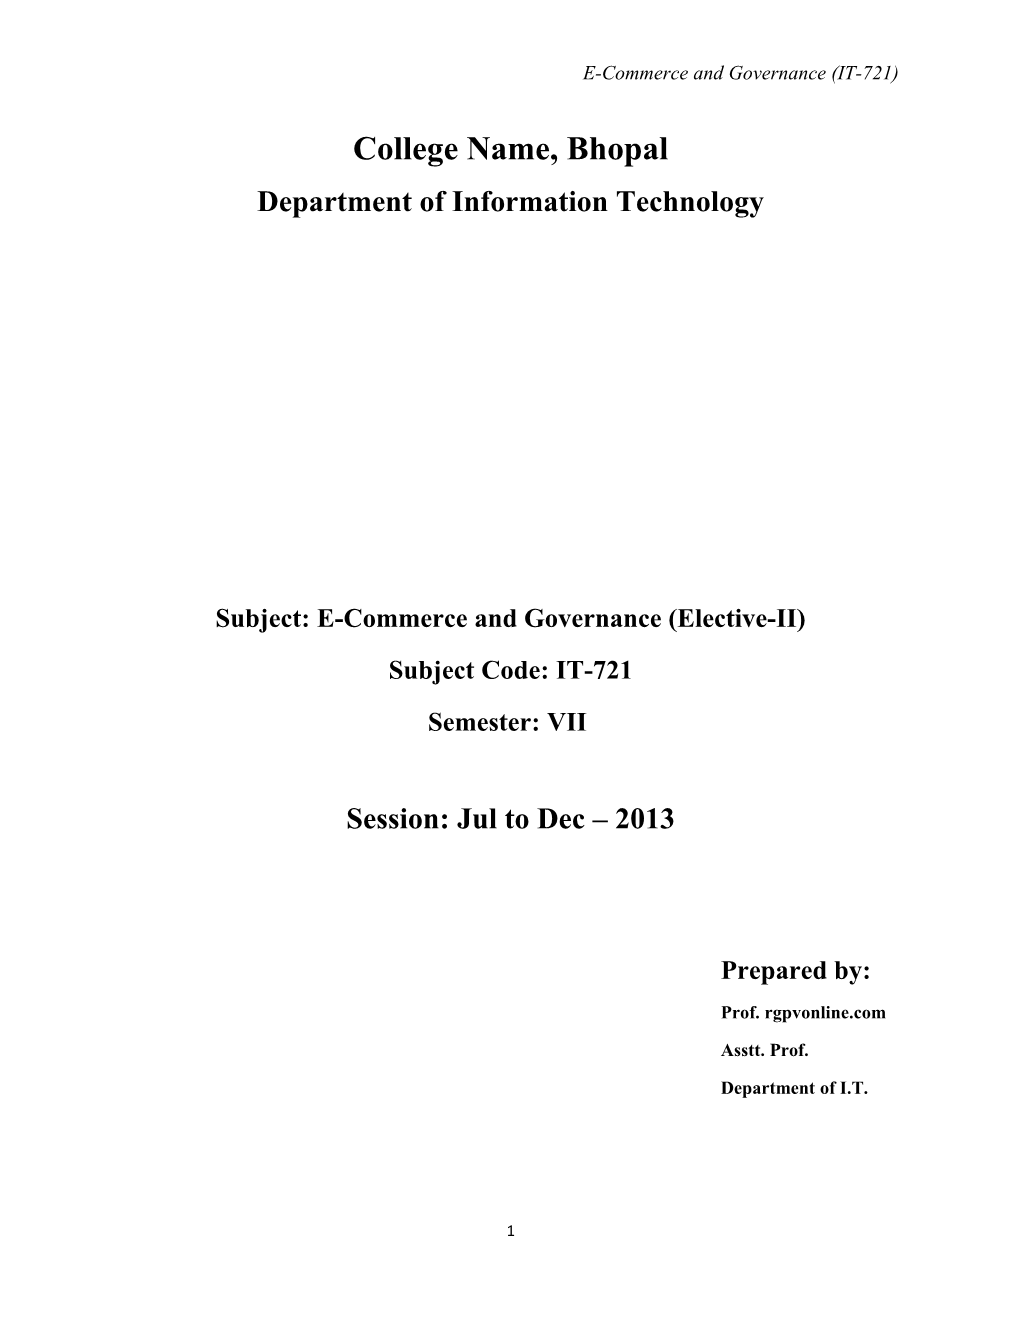 Subject: E-Commerce and Governance (Elective-II)